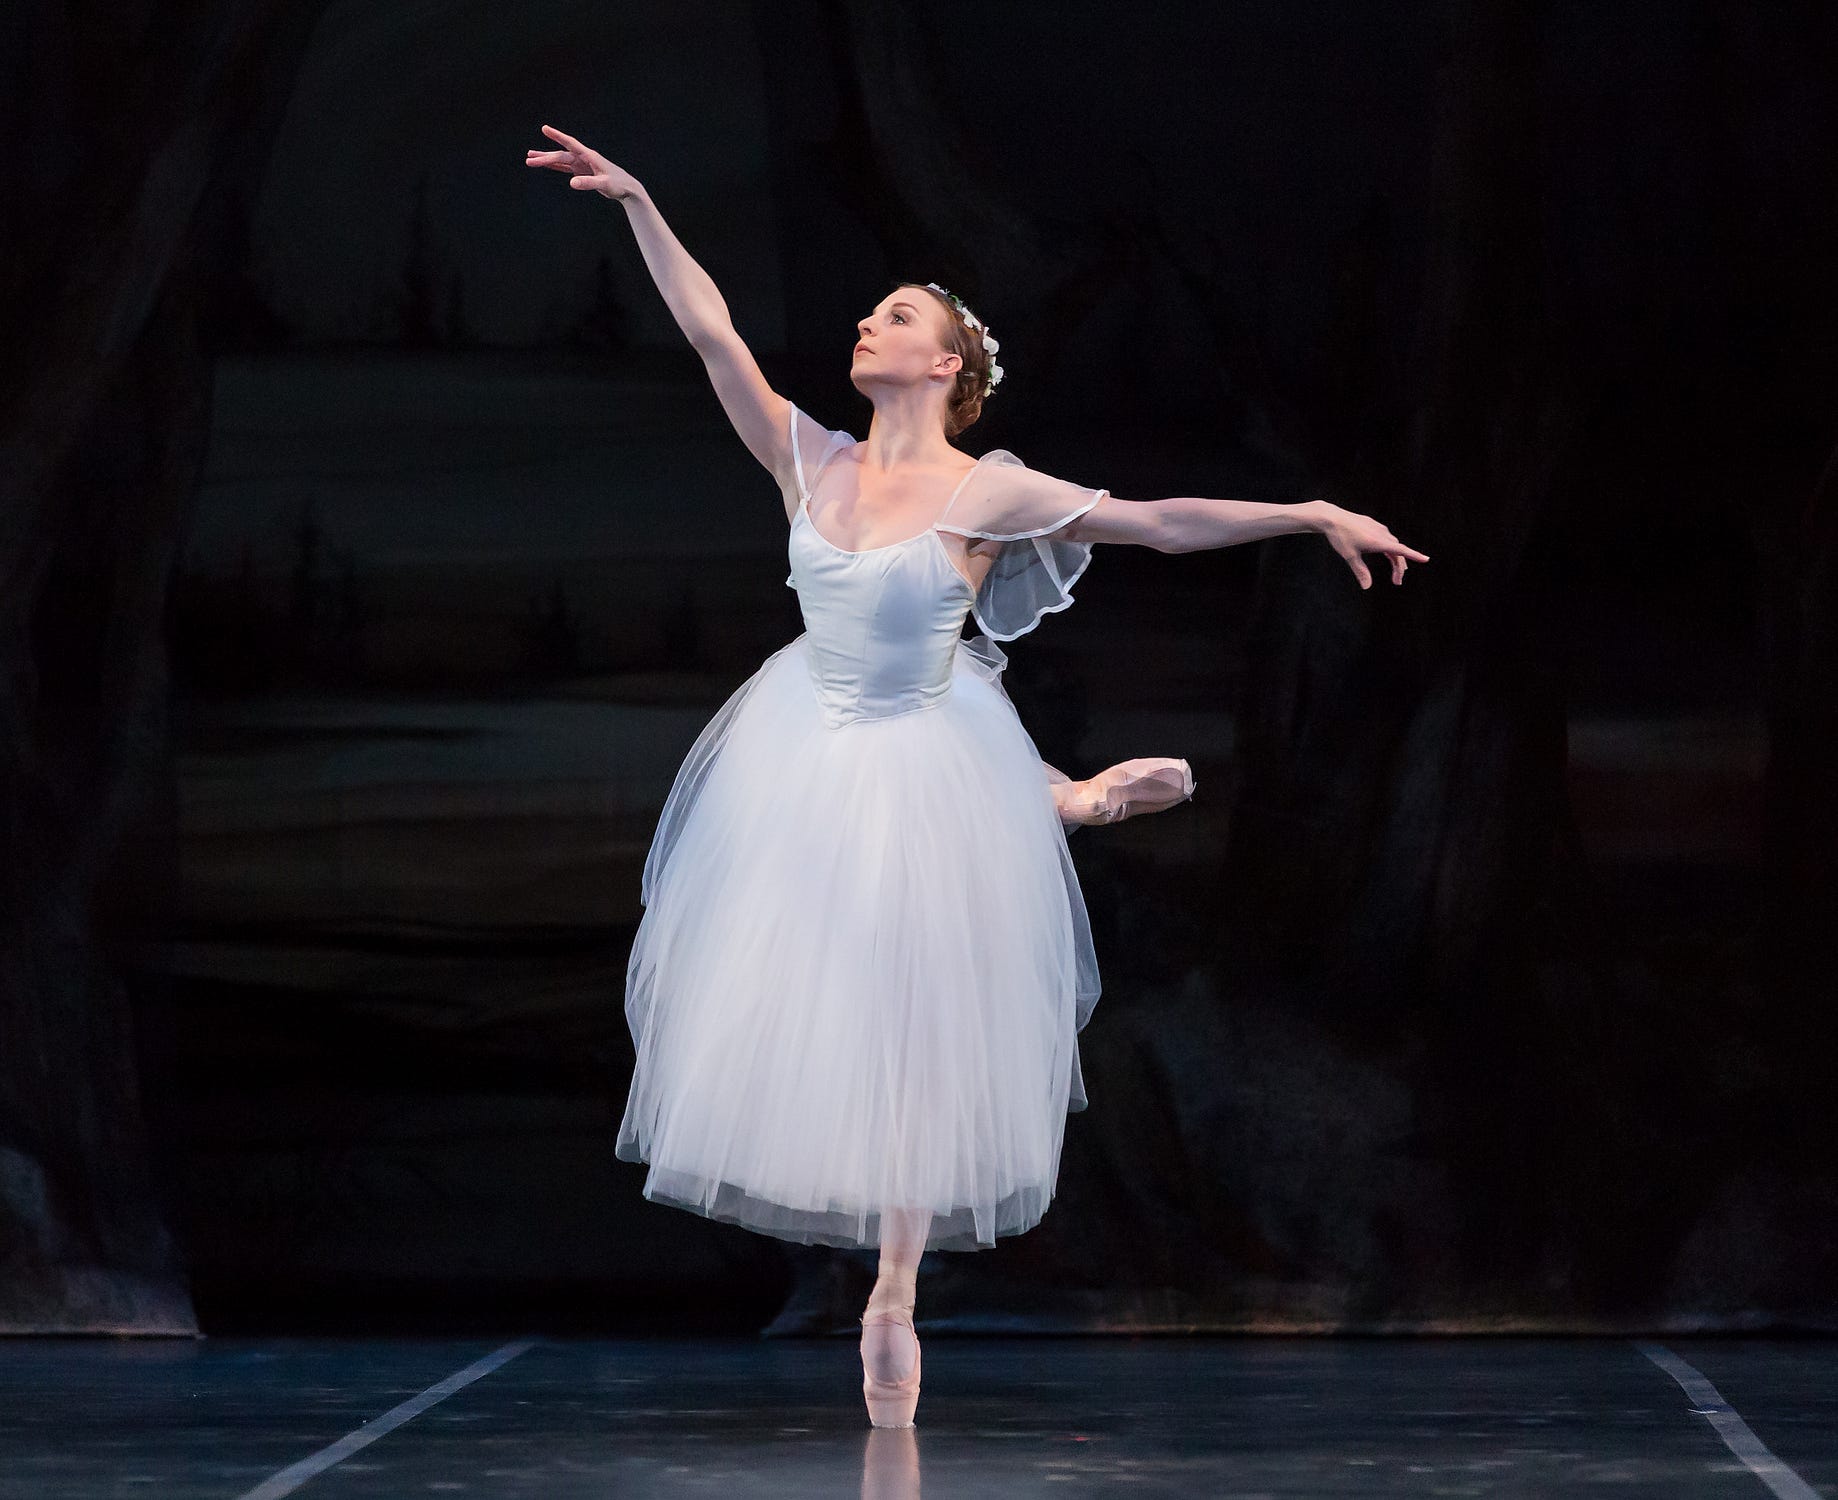 håndtag Utilgængelig Hotel GISELLE: A truly Romantic ballet. The ballet classic you must experience! |  by Ballet Austin | Medium